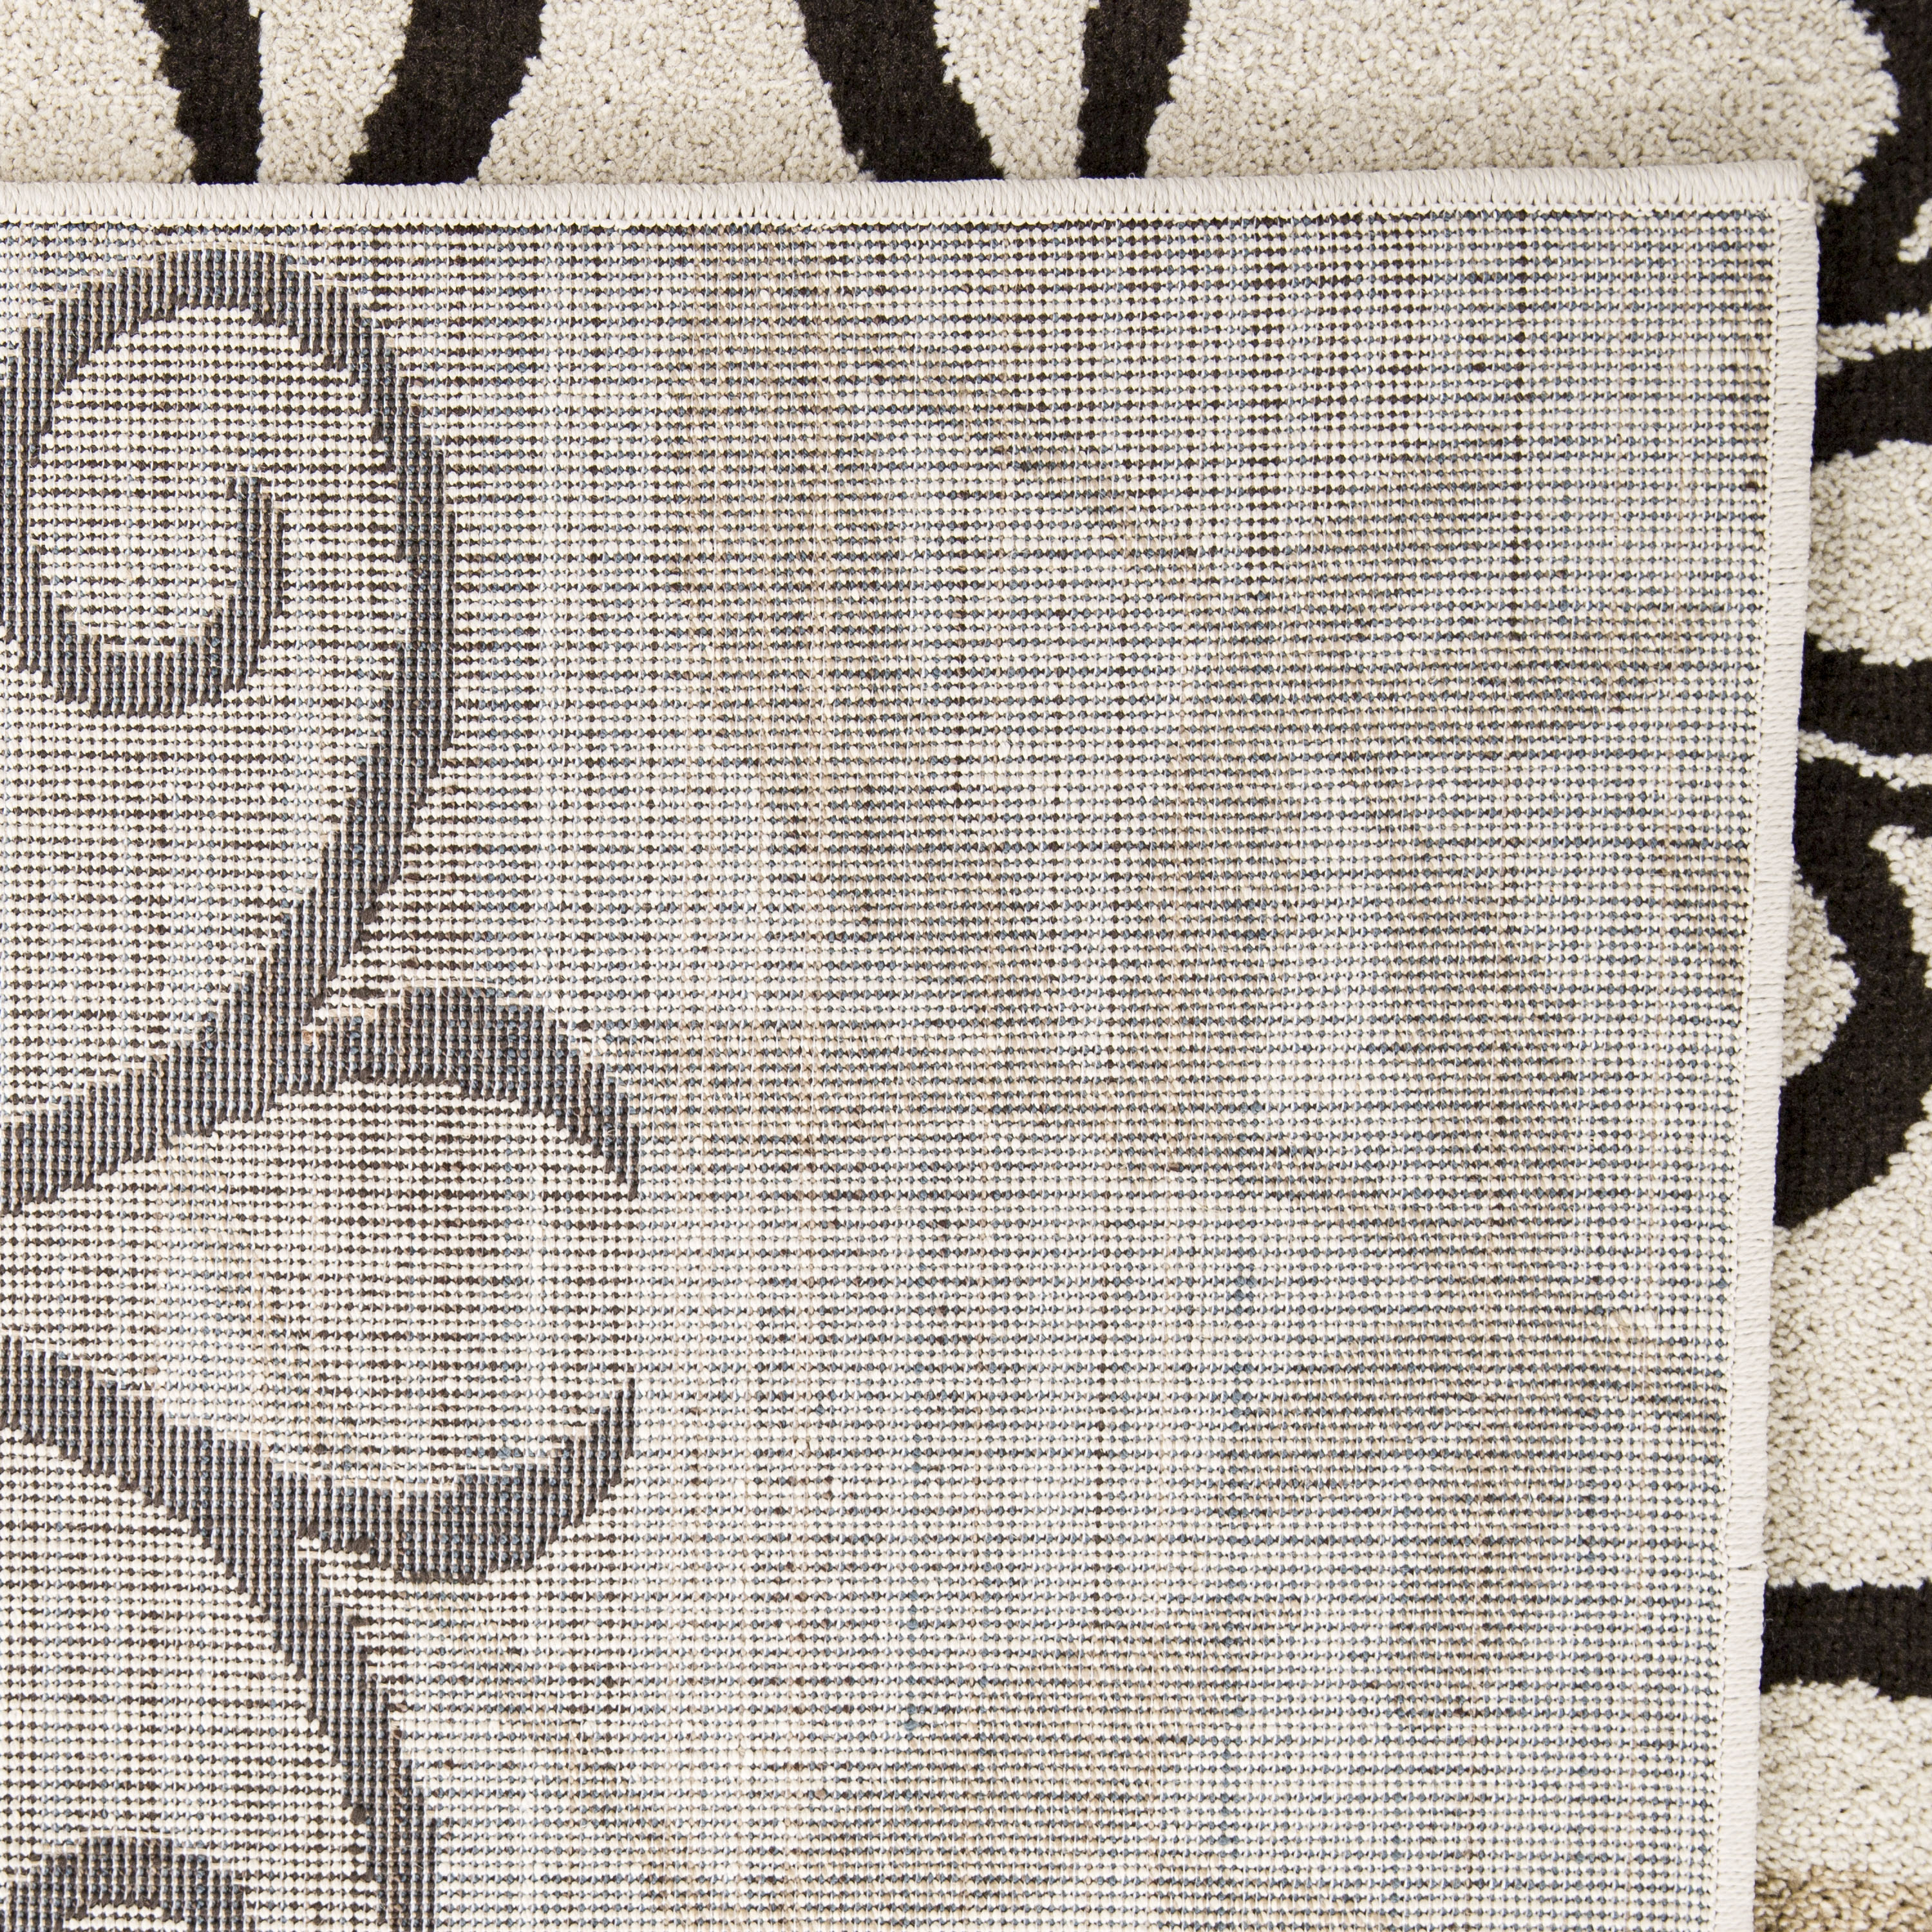 Better Homes & Gardens Iron Fleur Area Rug, Off-White, 2'6" x 3'8" - image 3 of 8